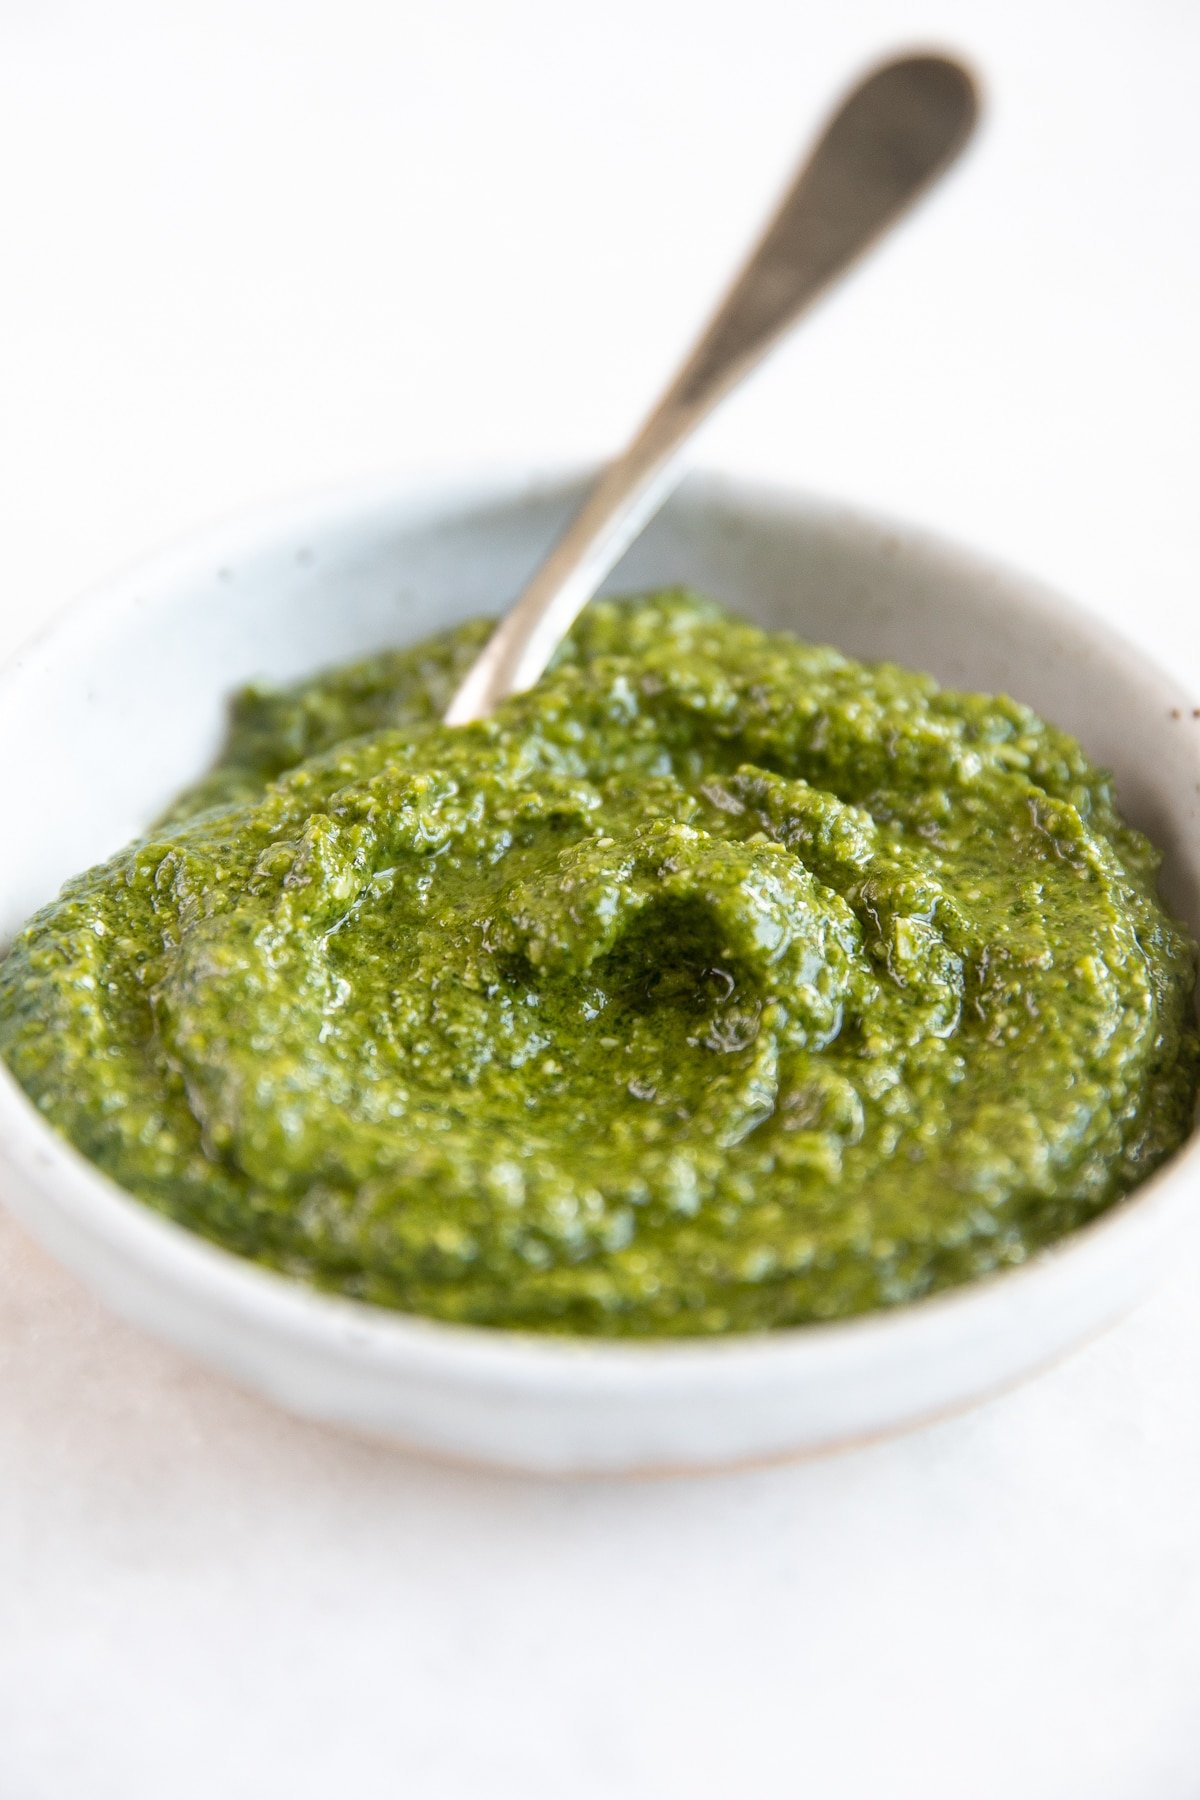 Small bowl filled with pesto basil recipe.